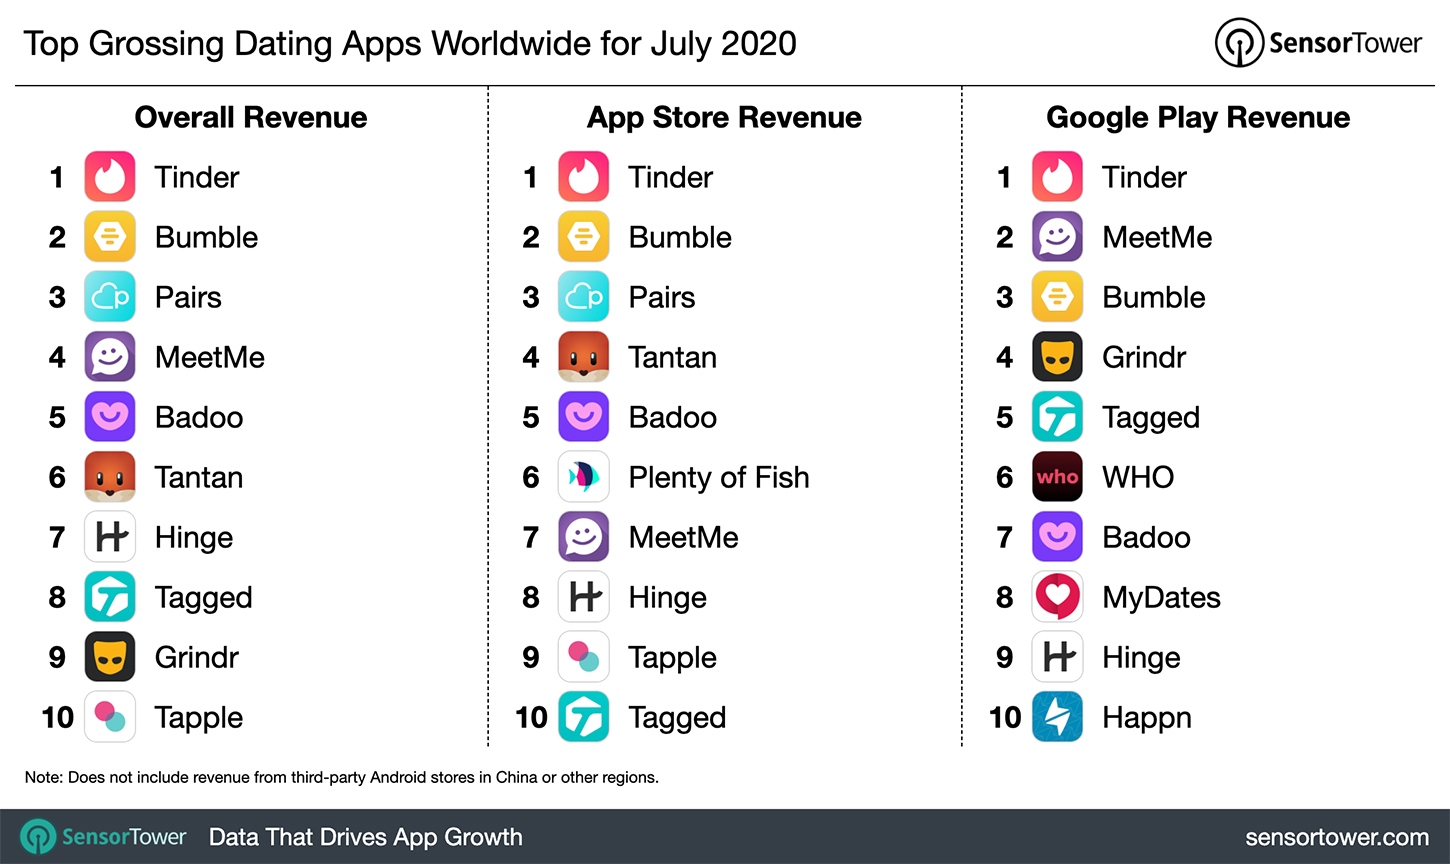 “Top Grossing Dating Apps Worldwide for July 2020